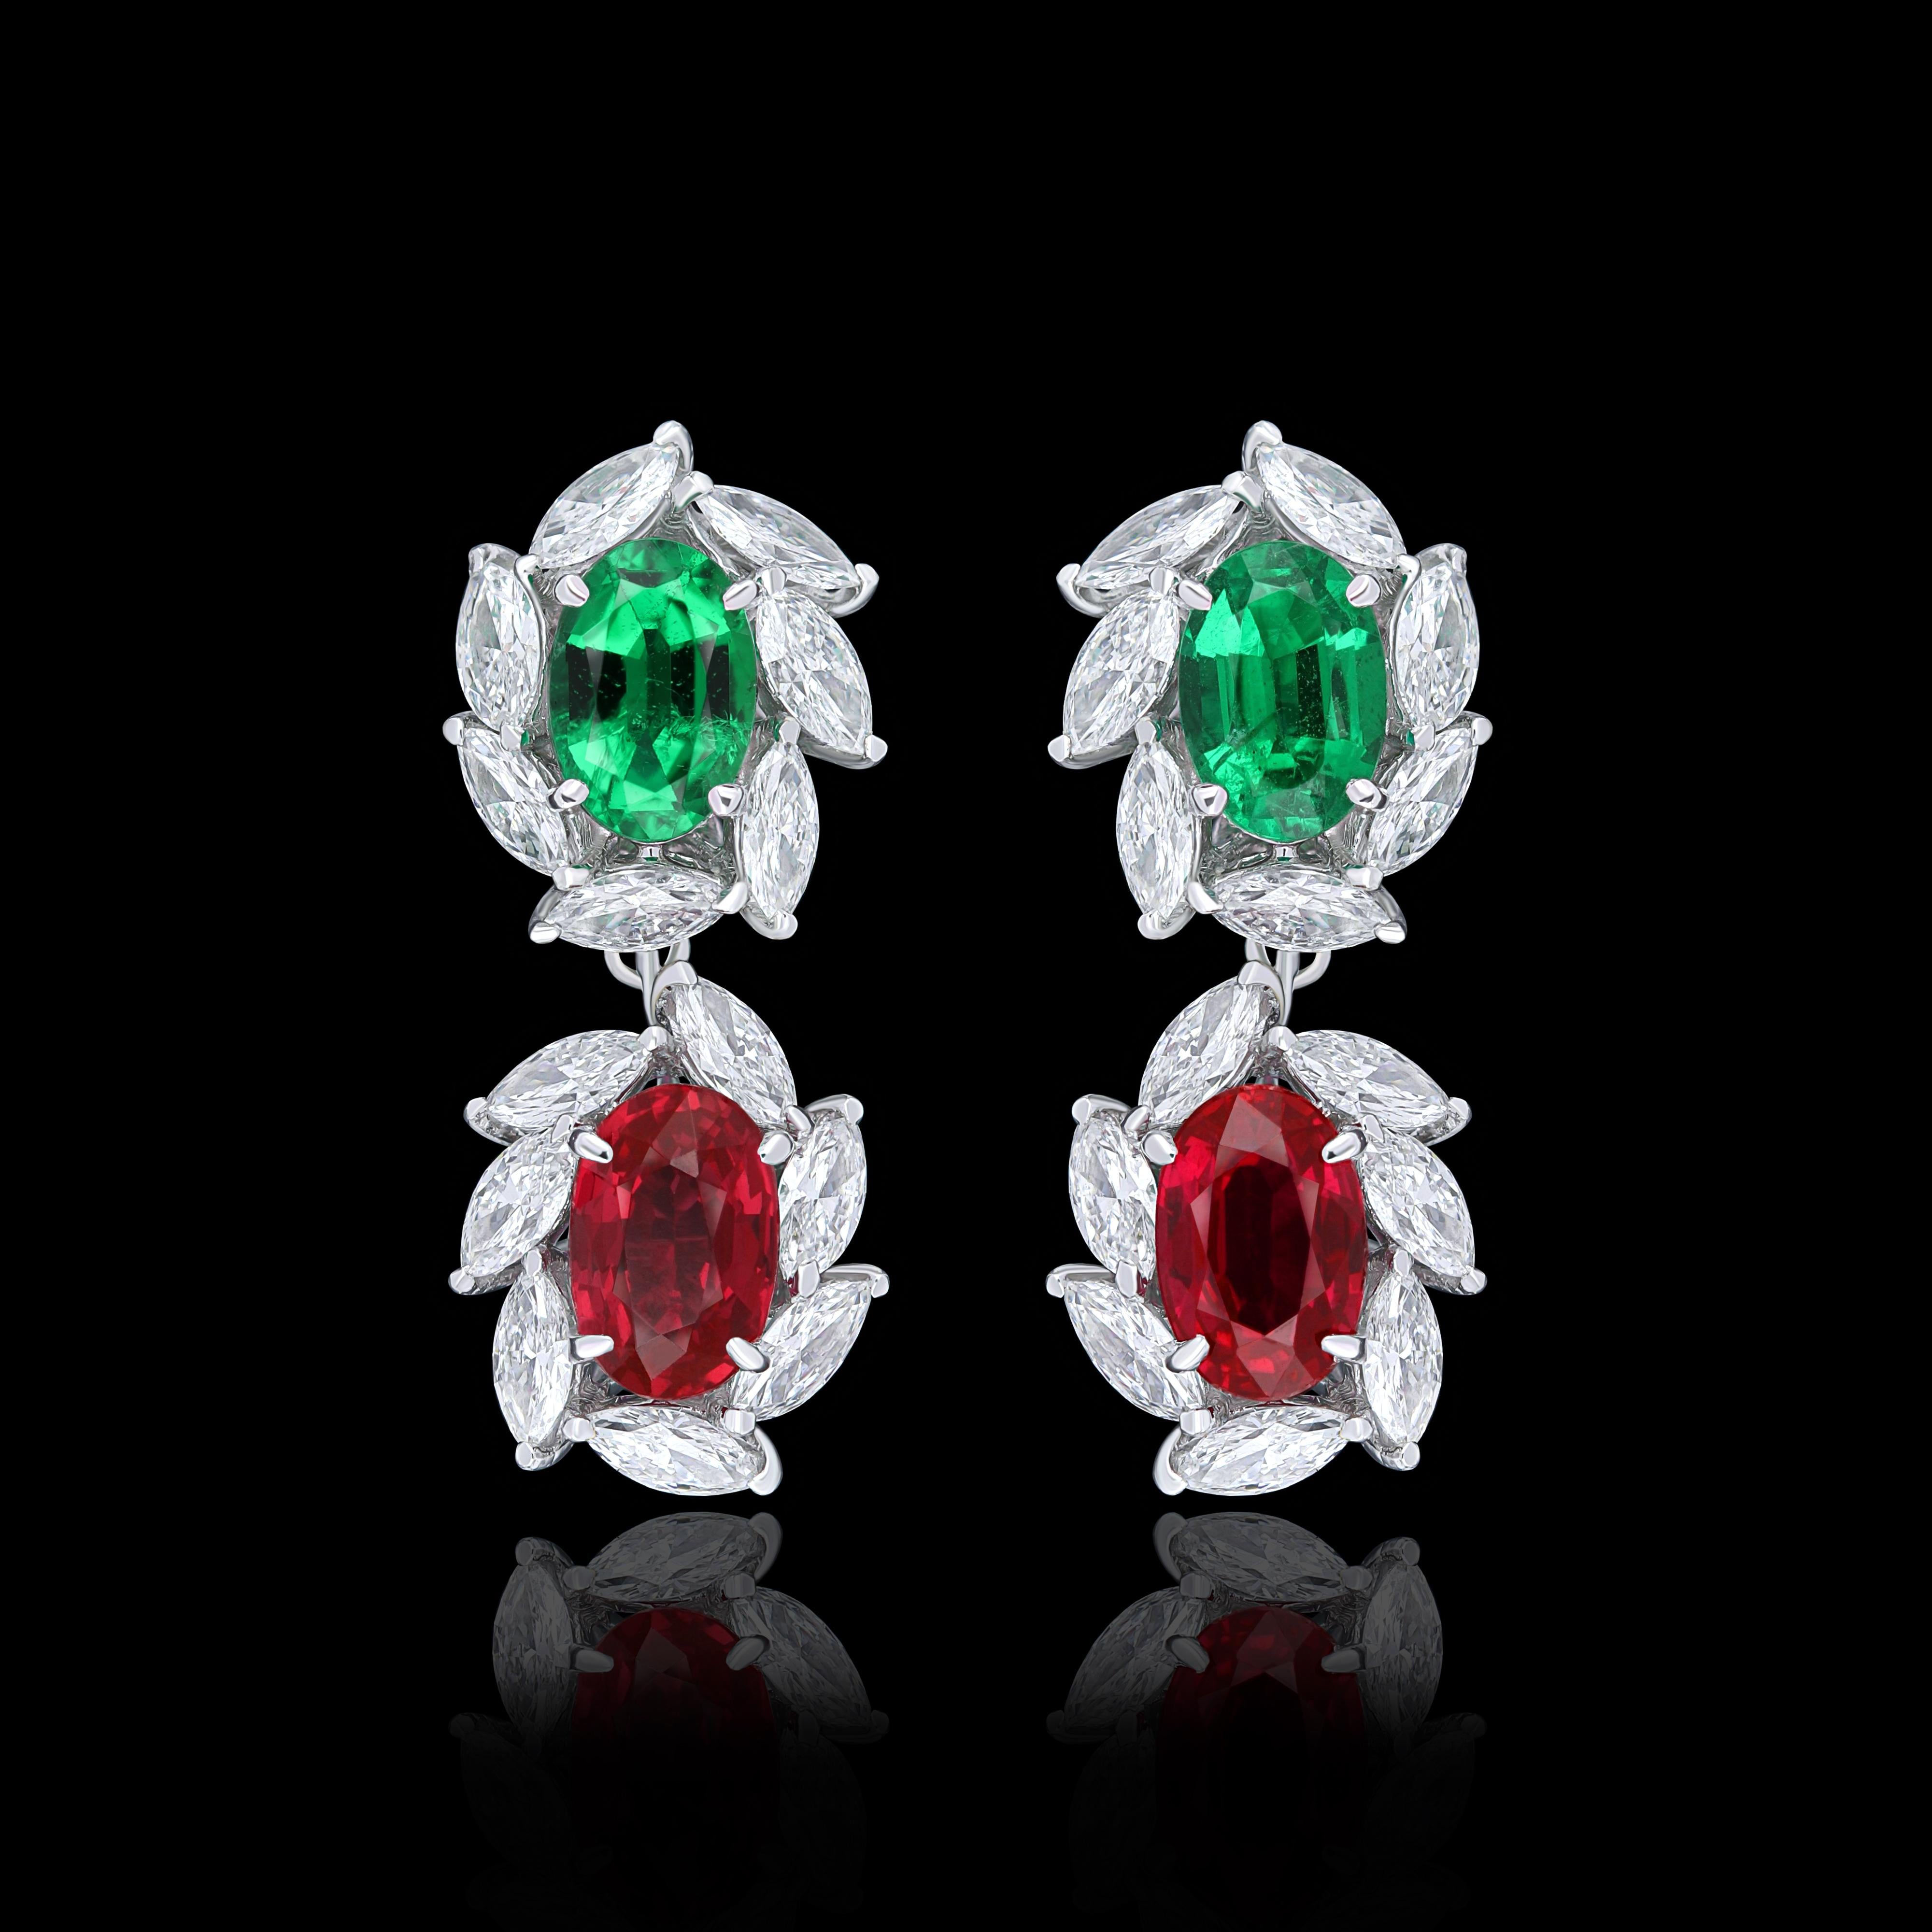 Elegant and exquisitely detailed 18 Karat White Gold Earring, center set with 1.29Cts .Oval Shape Blood Red Ruby, and 0.83Cts Vibrant Emeralds  accented with  micro pave set Diamonds, weighing approx. 1.50Cts Beautifully Hand crafted in 18 Karat